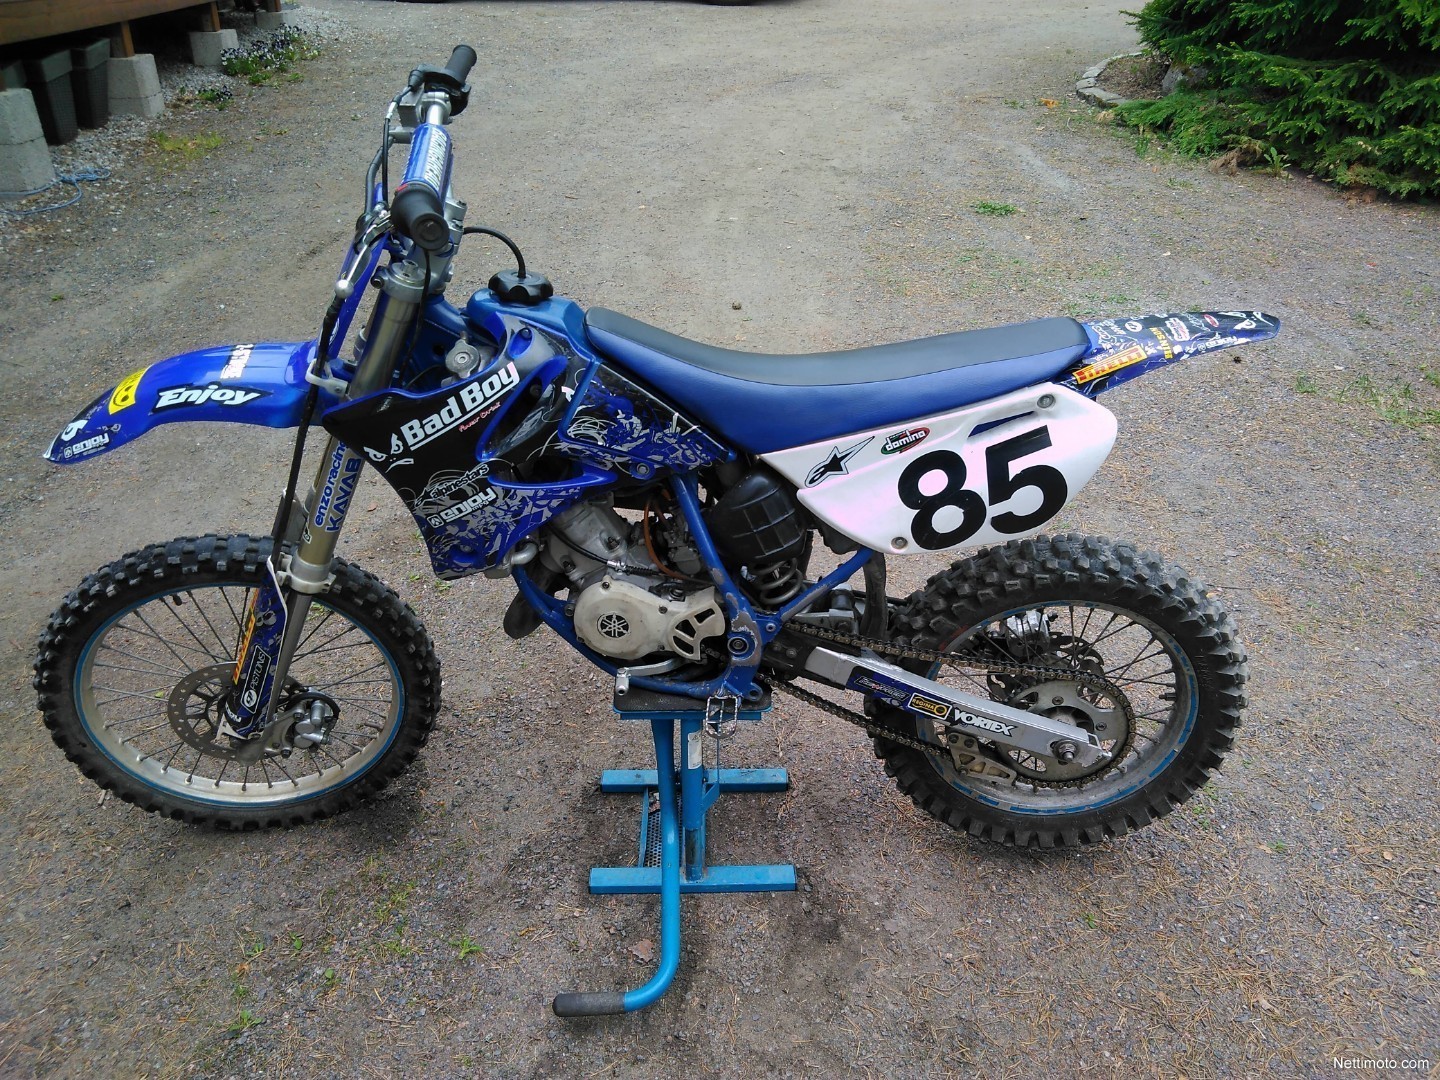 2003 yamaha yz 85 yz85 85cc dirtbike. Not sure for sale on 